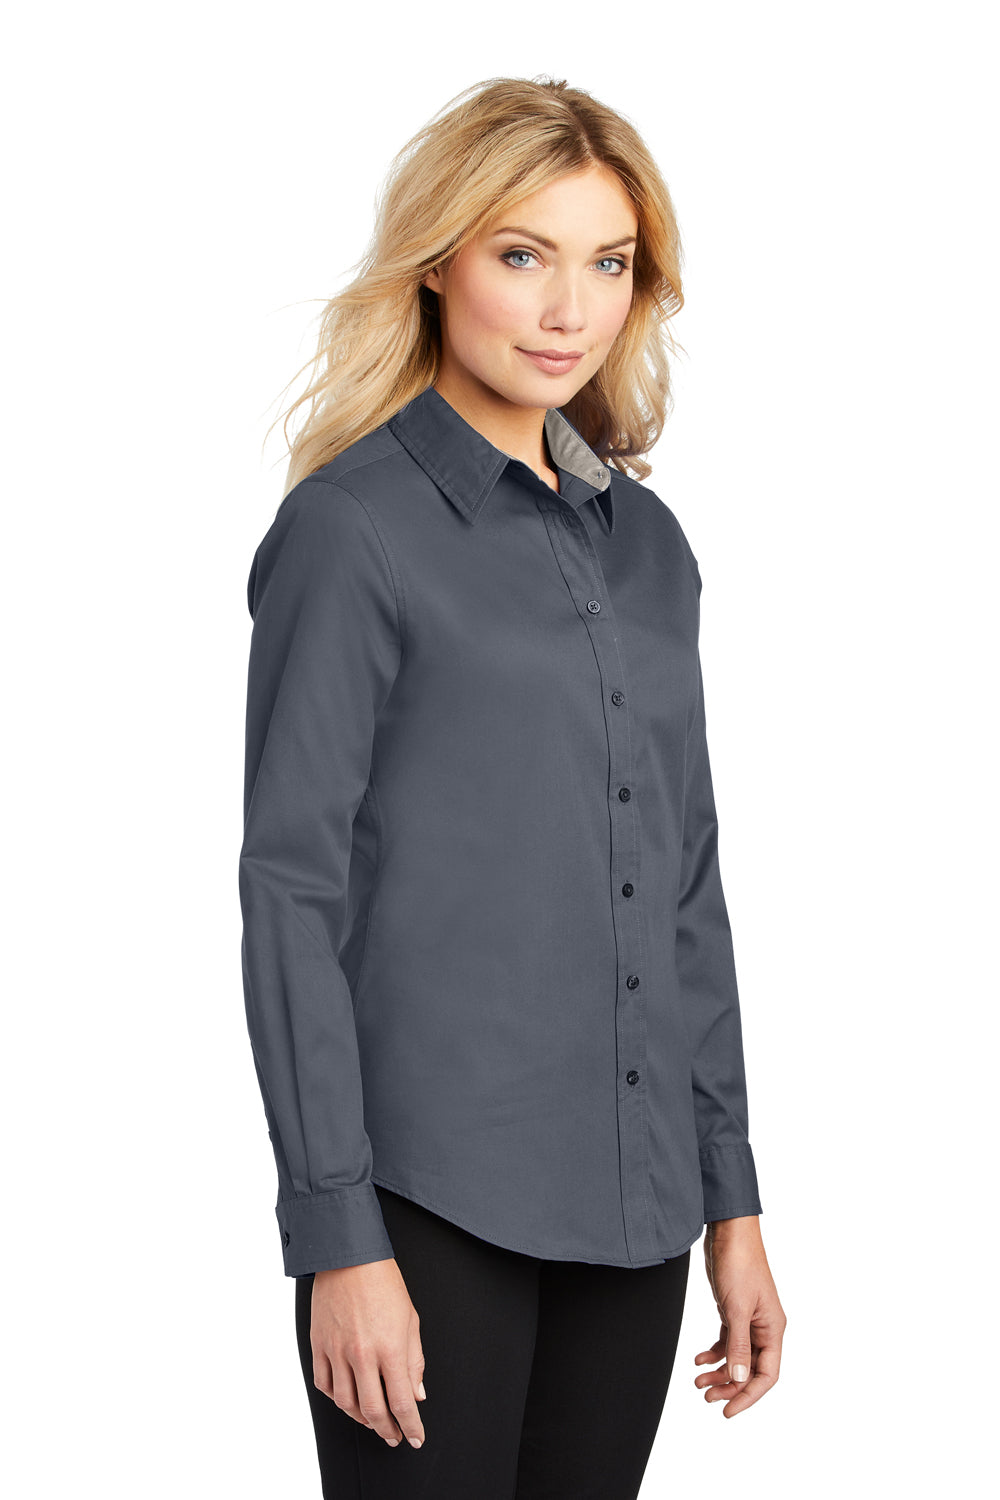 Port Authority L608 Womens Easy Care Wrinkle Resistant Long Sleeve Button Down Shirt Steel Grey 3Q